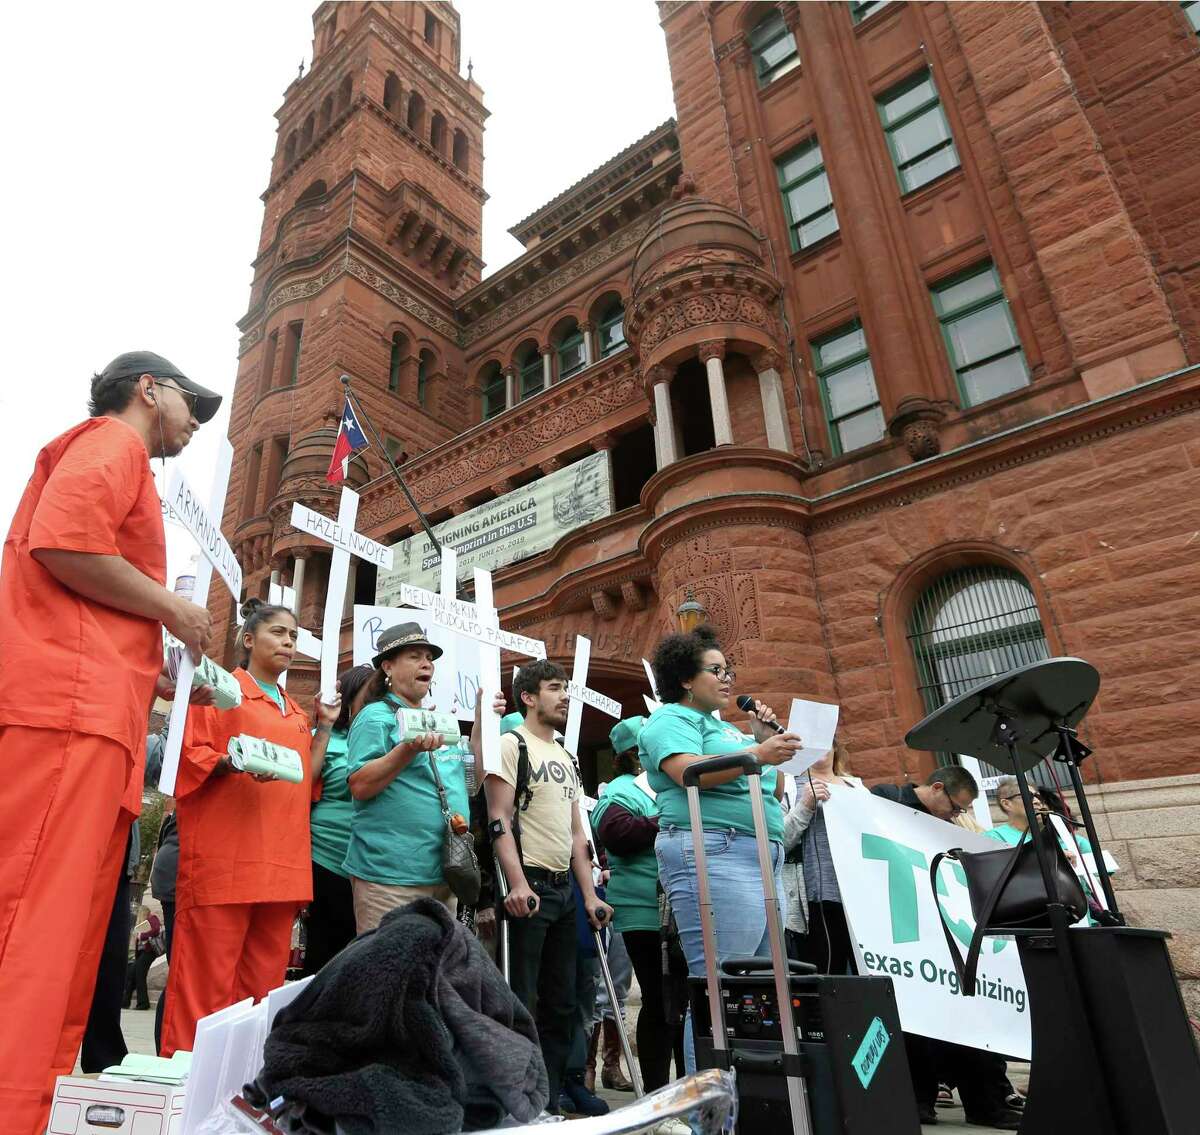 Members of the Texas Organizing Project held a press conference in March calling for bail reform. So far, Bexar County’s criminal court judges have failed to act. Perhaps a recent ruling supporting bail reform in Harris County will change that.